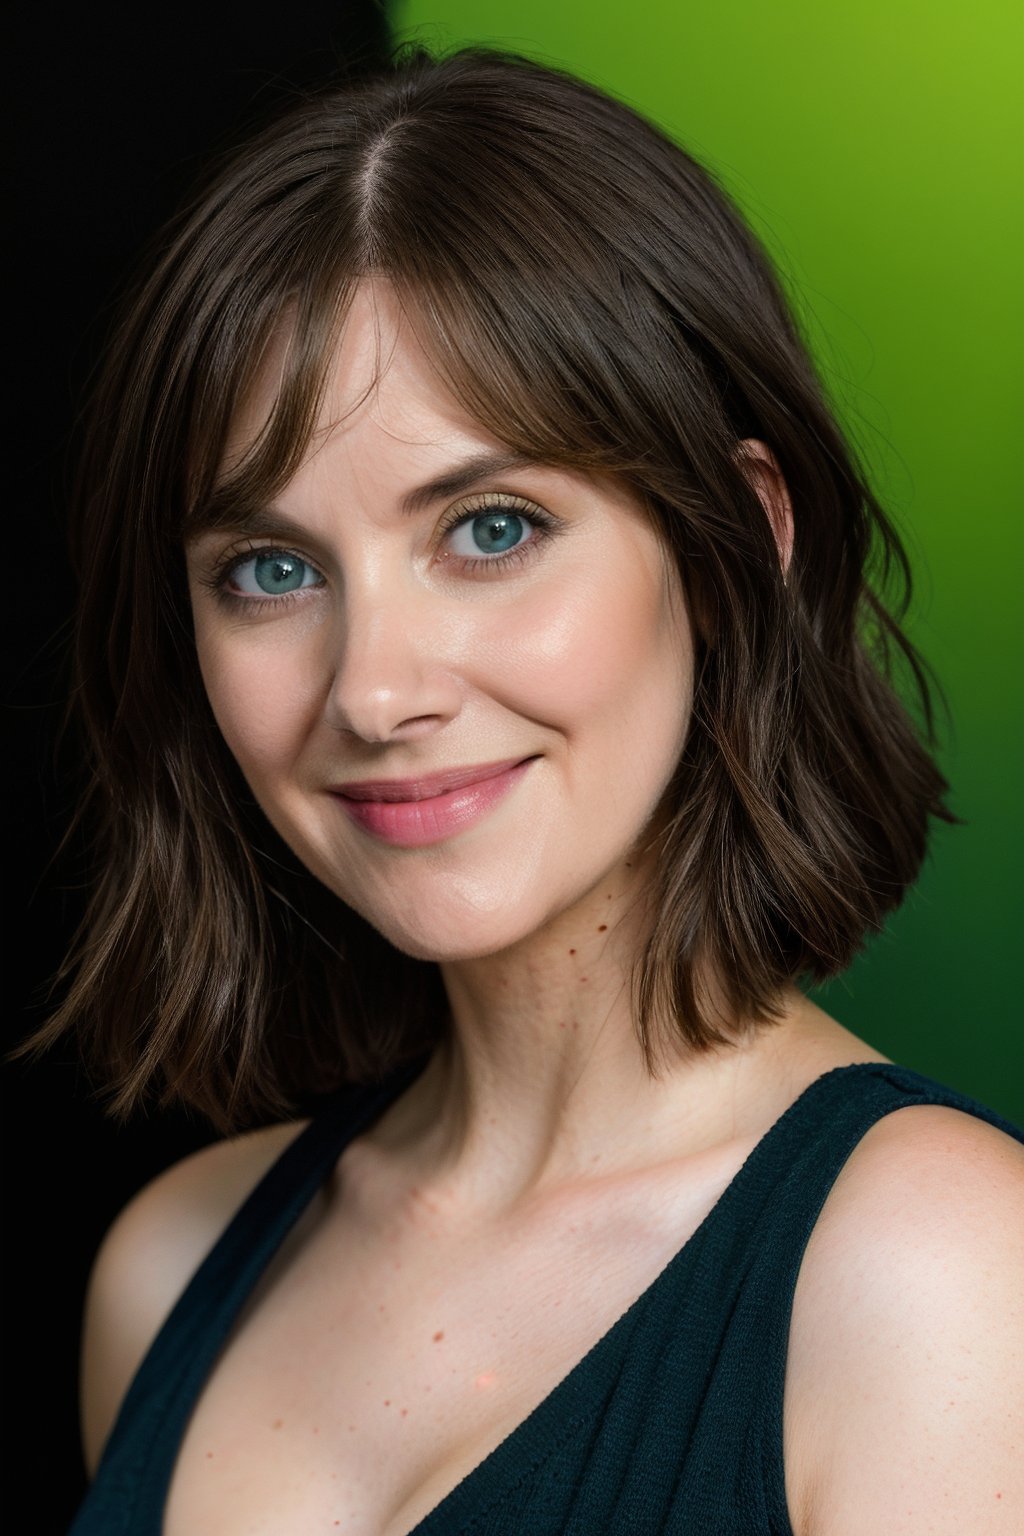 wo_alibrie01, big smile, headshot, blue eyes, brown bob hair, green shirt, in a photoshoot, black background, 8k, masterpiece, high quality, highres, photorealistic, raw, extremely detail
